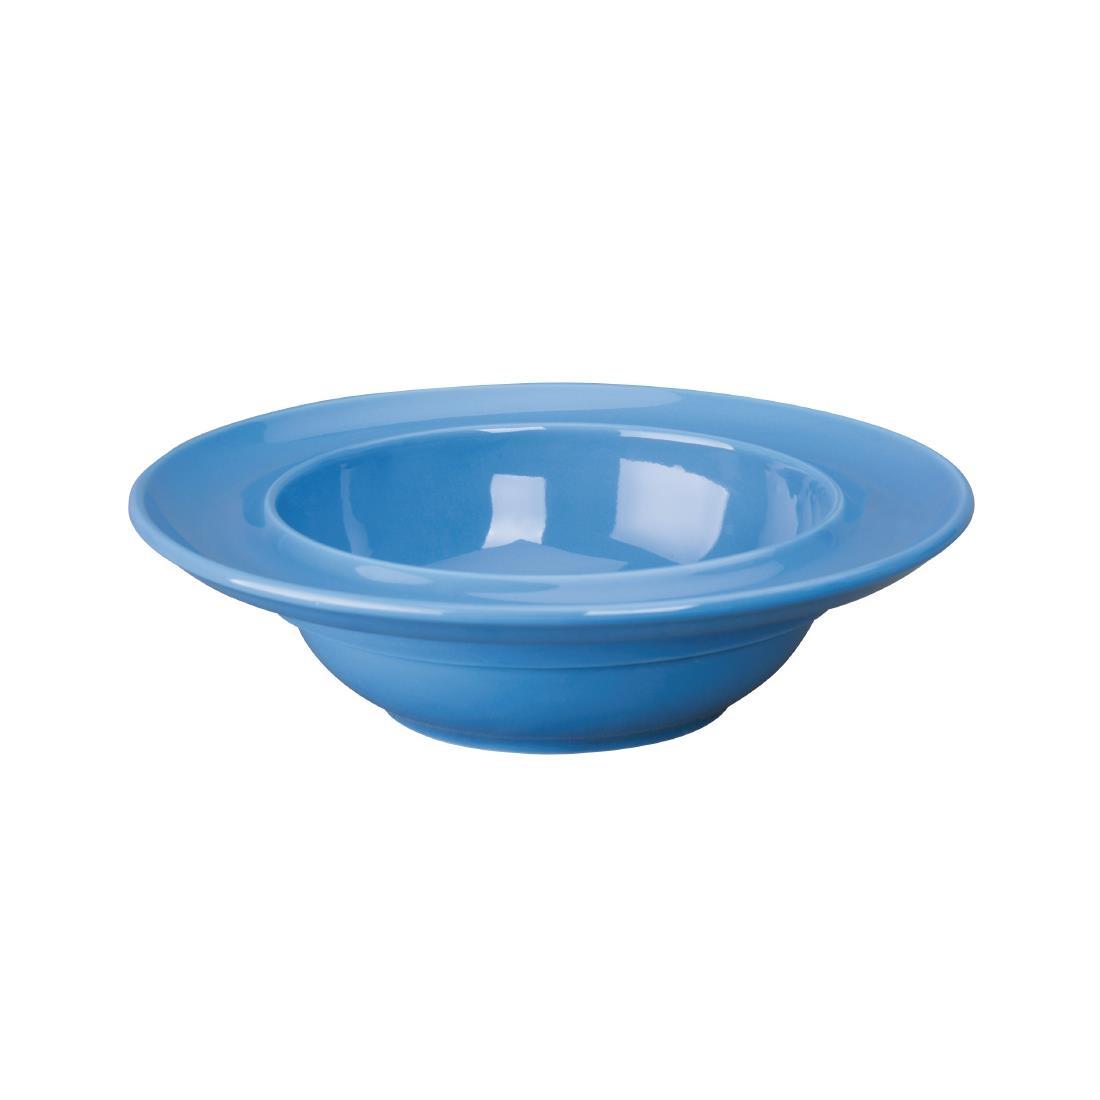 Olympia Heritage Raised Rim Bowl Blue 205mm (Pack of 4) - DW142  - 2